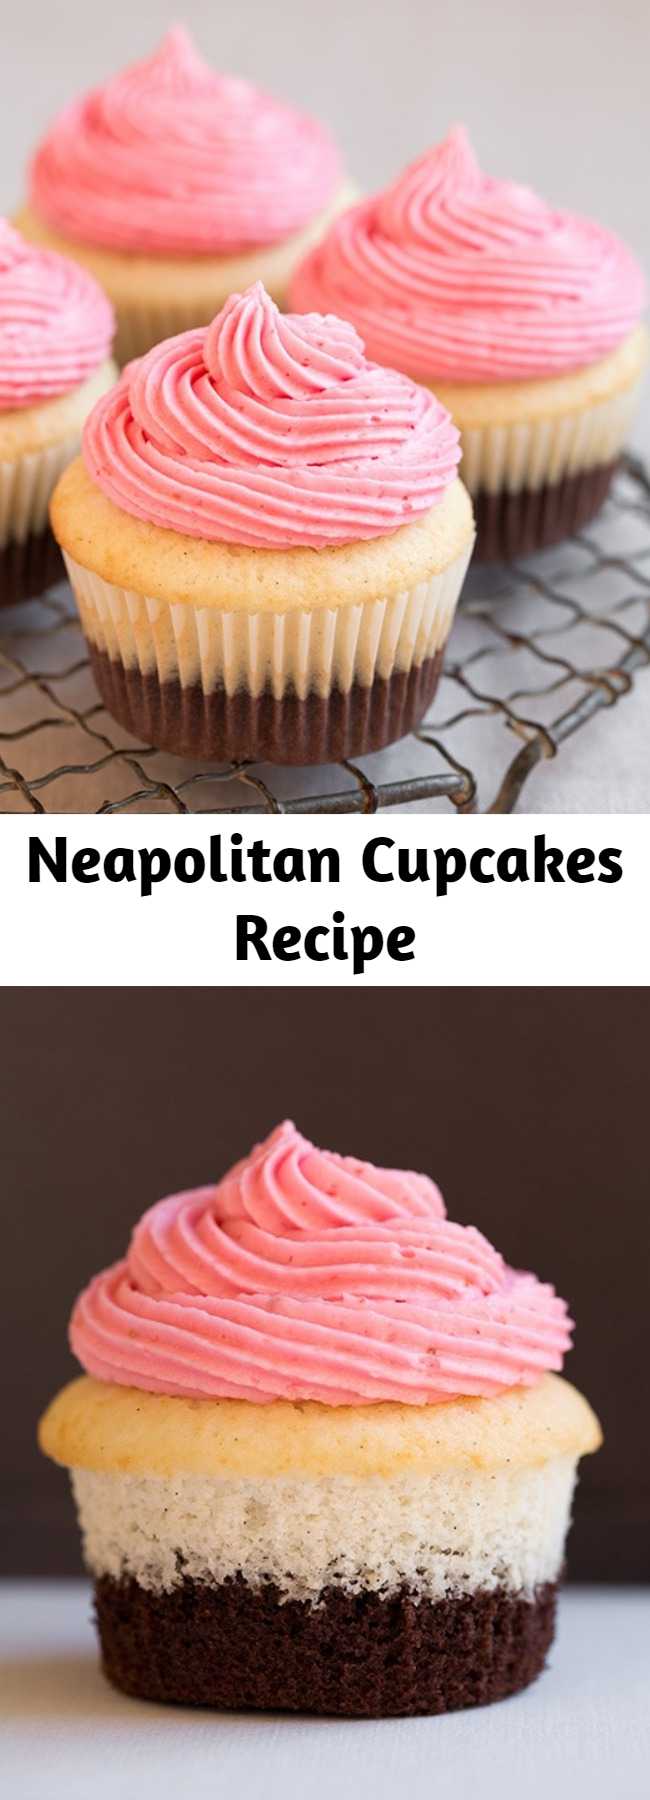 Neapolitan Cupcakes Recipe - A luscious and impressive cupcake with three irresistible flavors in one - a milk chocolate cupcake, a fluffy vanilla bean cupcake and strawberry buttercream frosting. This is easily the most unique cupcake recipe I’ve made to date!